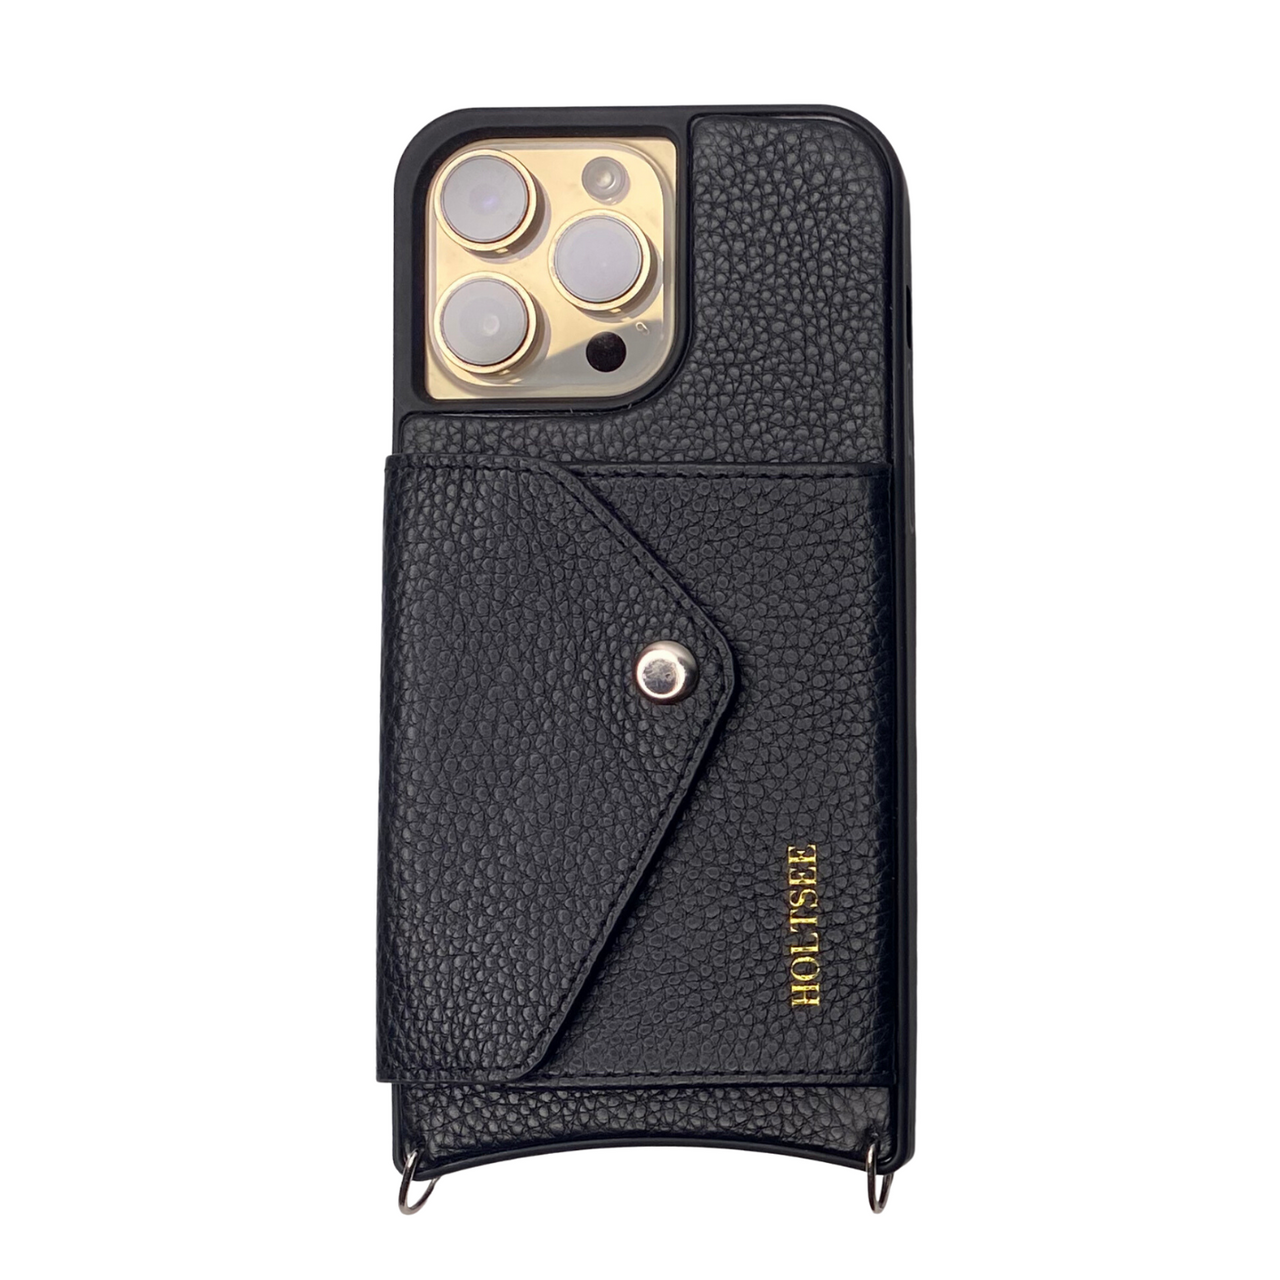 IPhone Case with Snap Closed Pocket